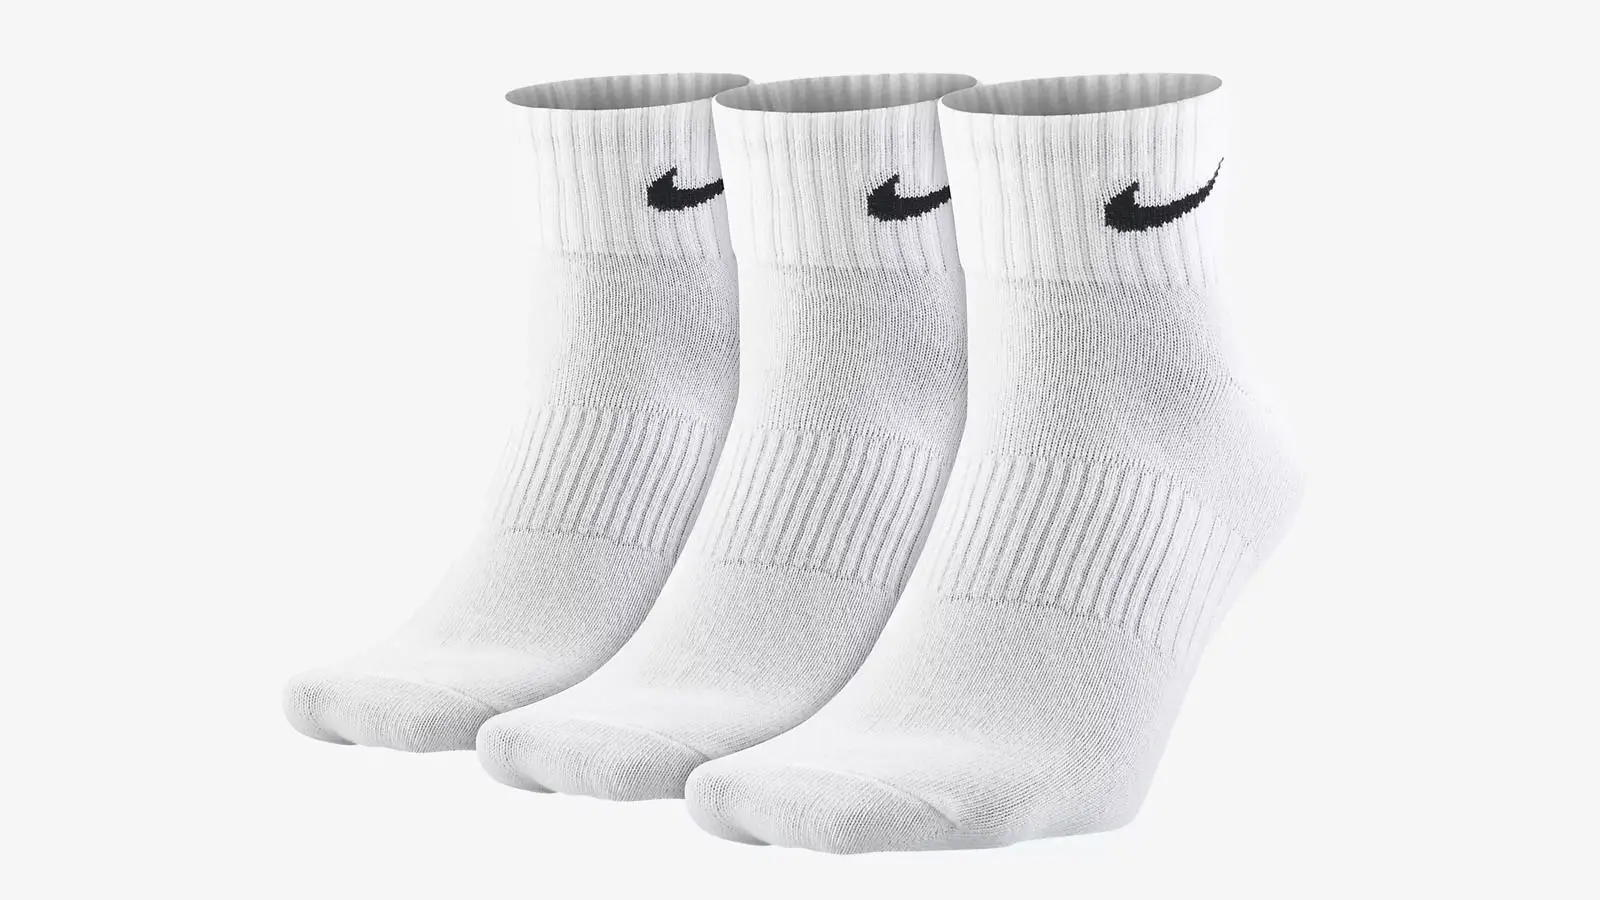 12 Everyday Nike Socks To Wear With Your Fave Sneaks | The Sole Supplier